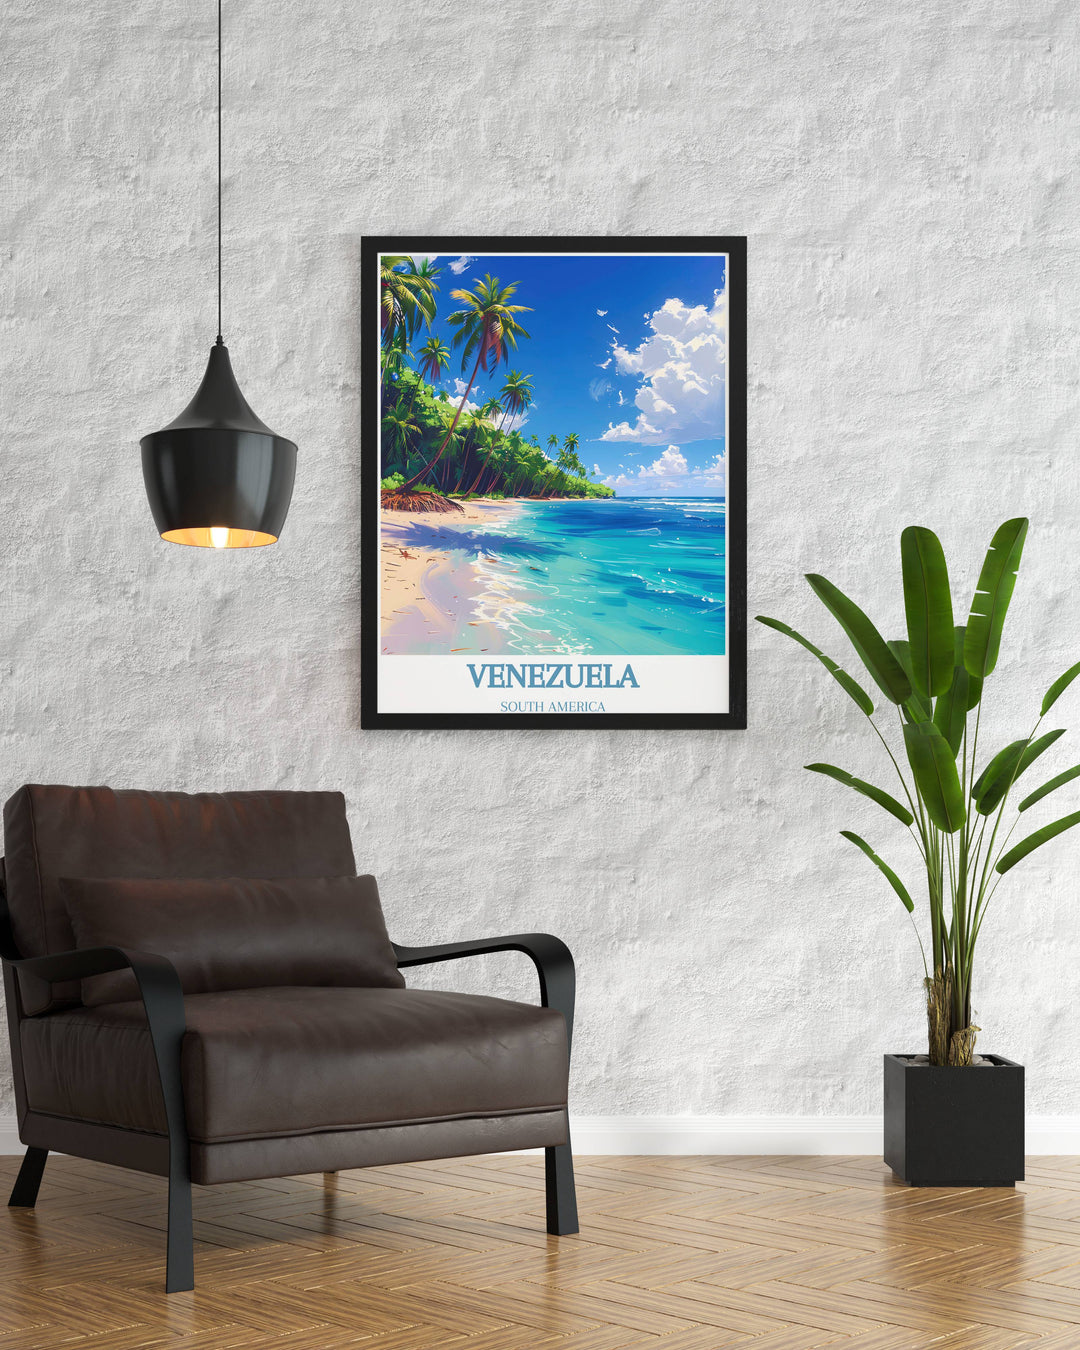 Scenic depiction of Morrocoy National Parks sun kissed beaches and mangrove forests, bringing South Americas charm to your space.